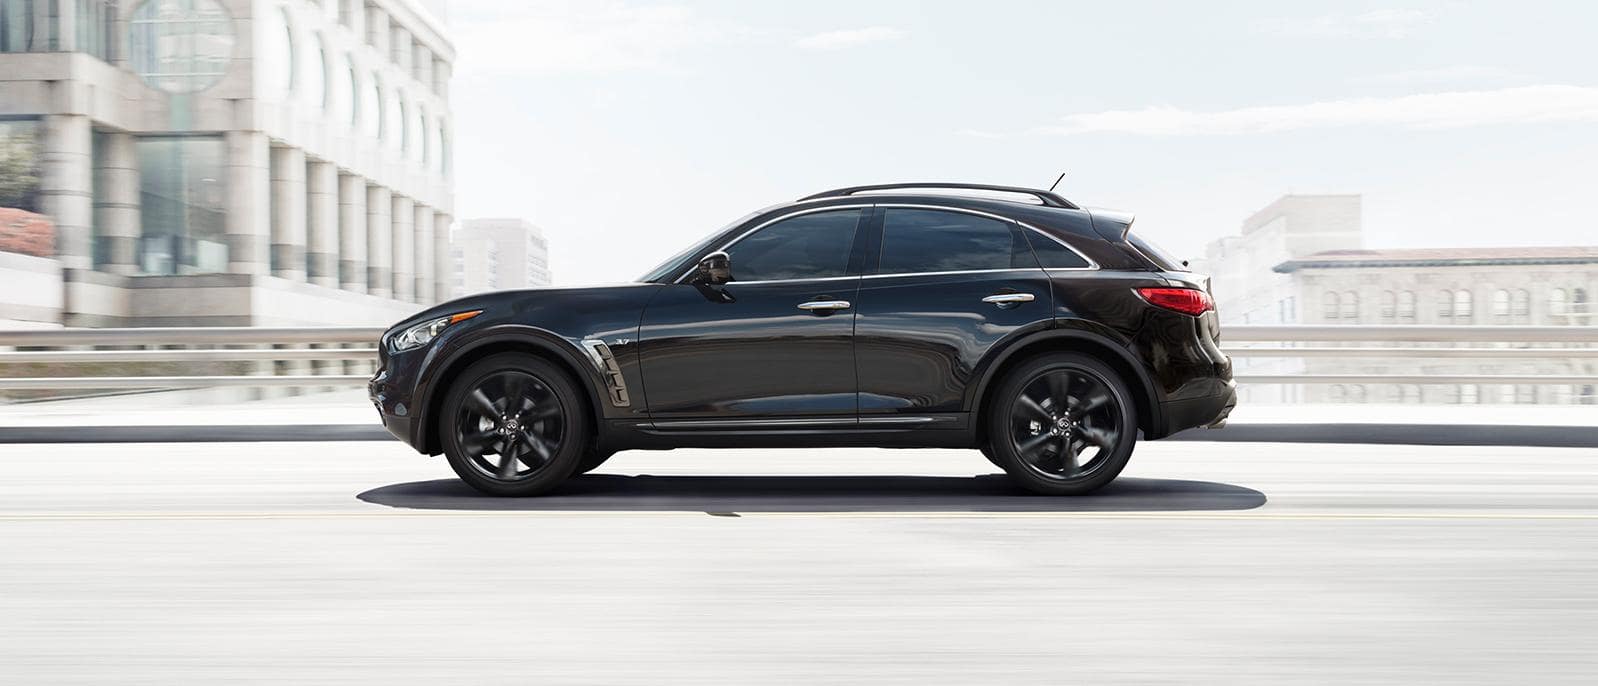 USED 2017 INFINITI QX70 FOR SALE IN CHICAGO, IL